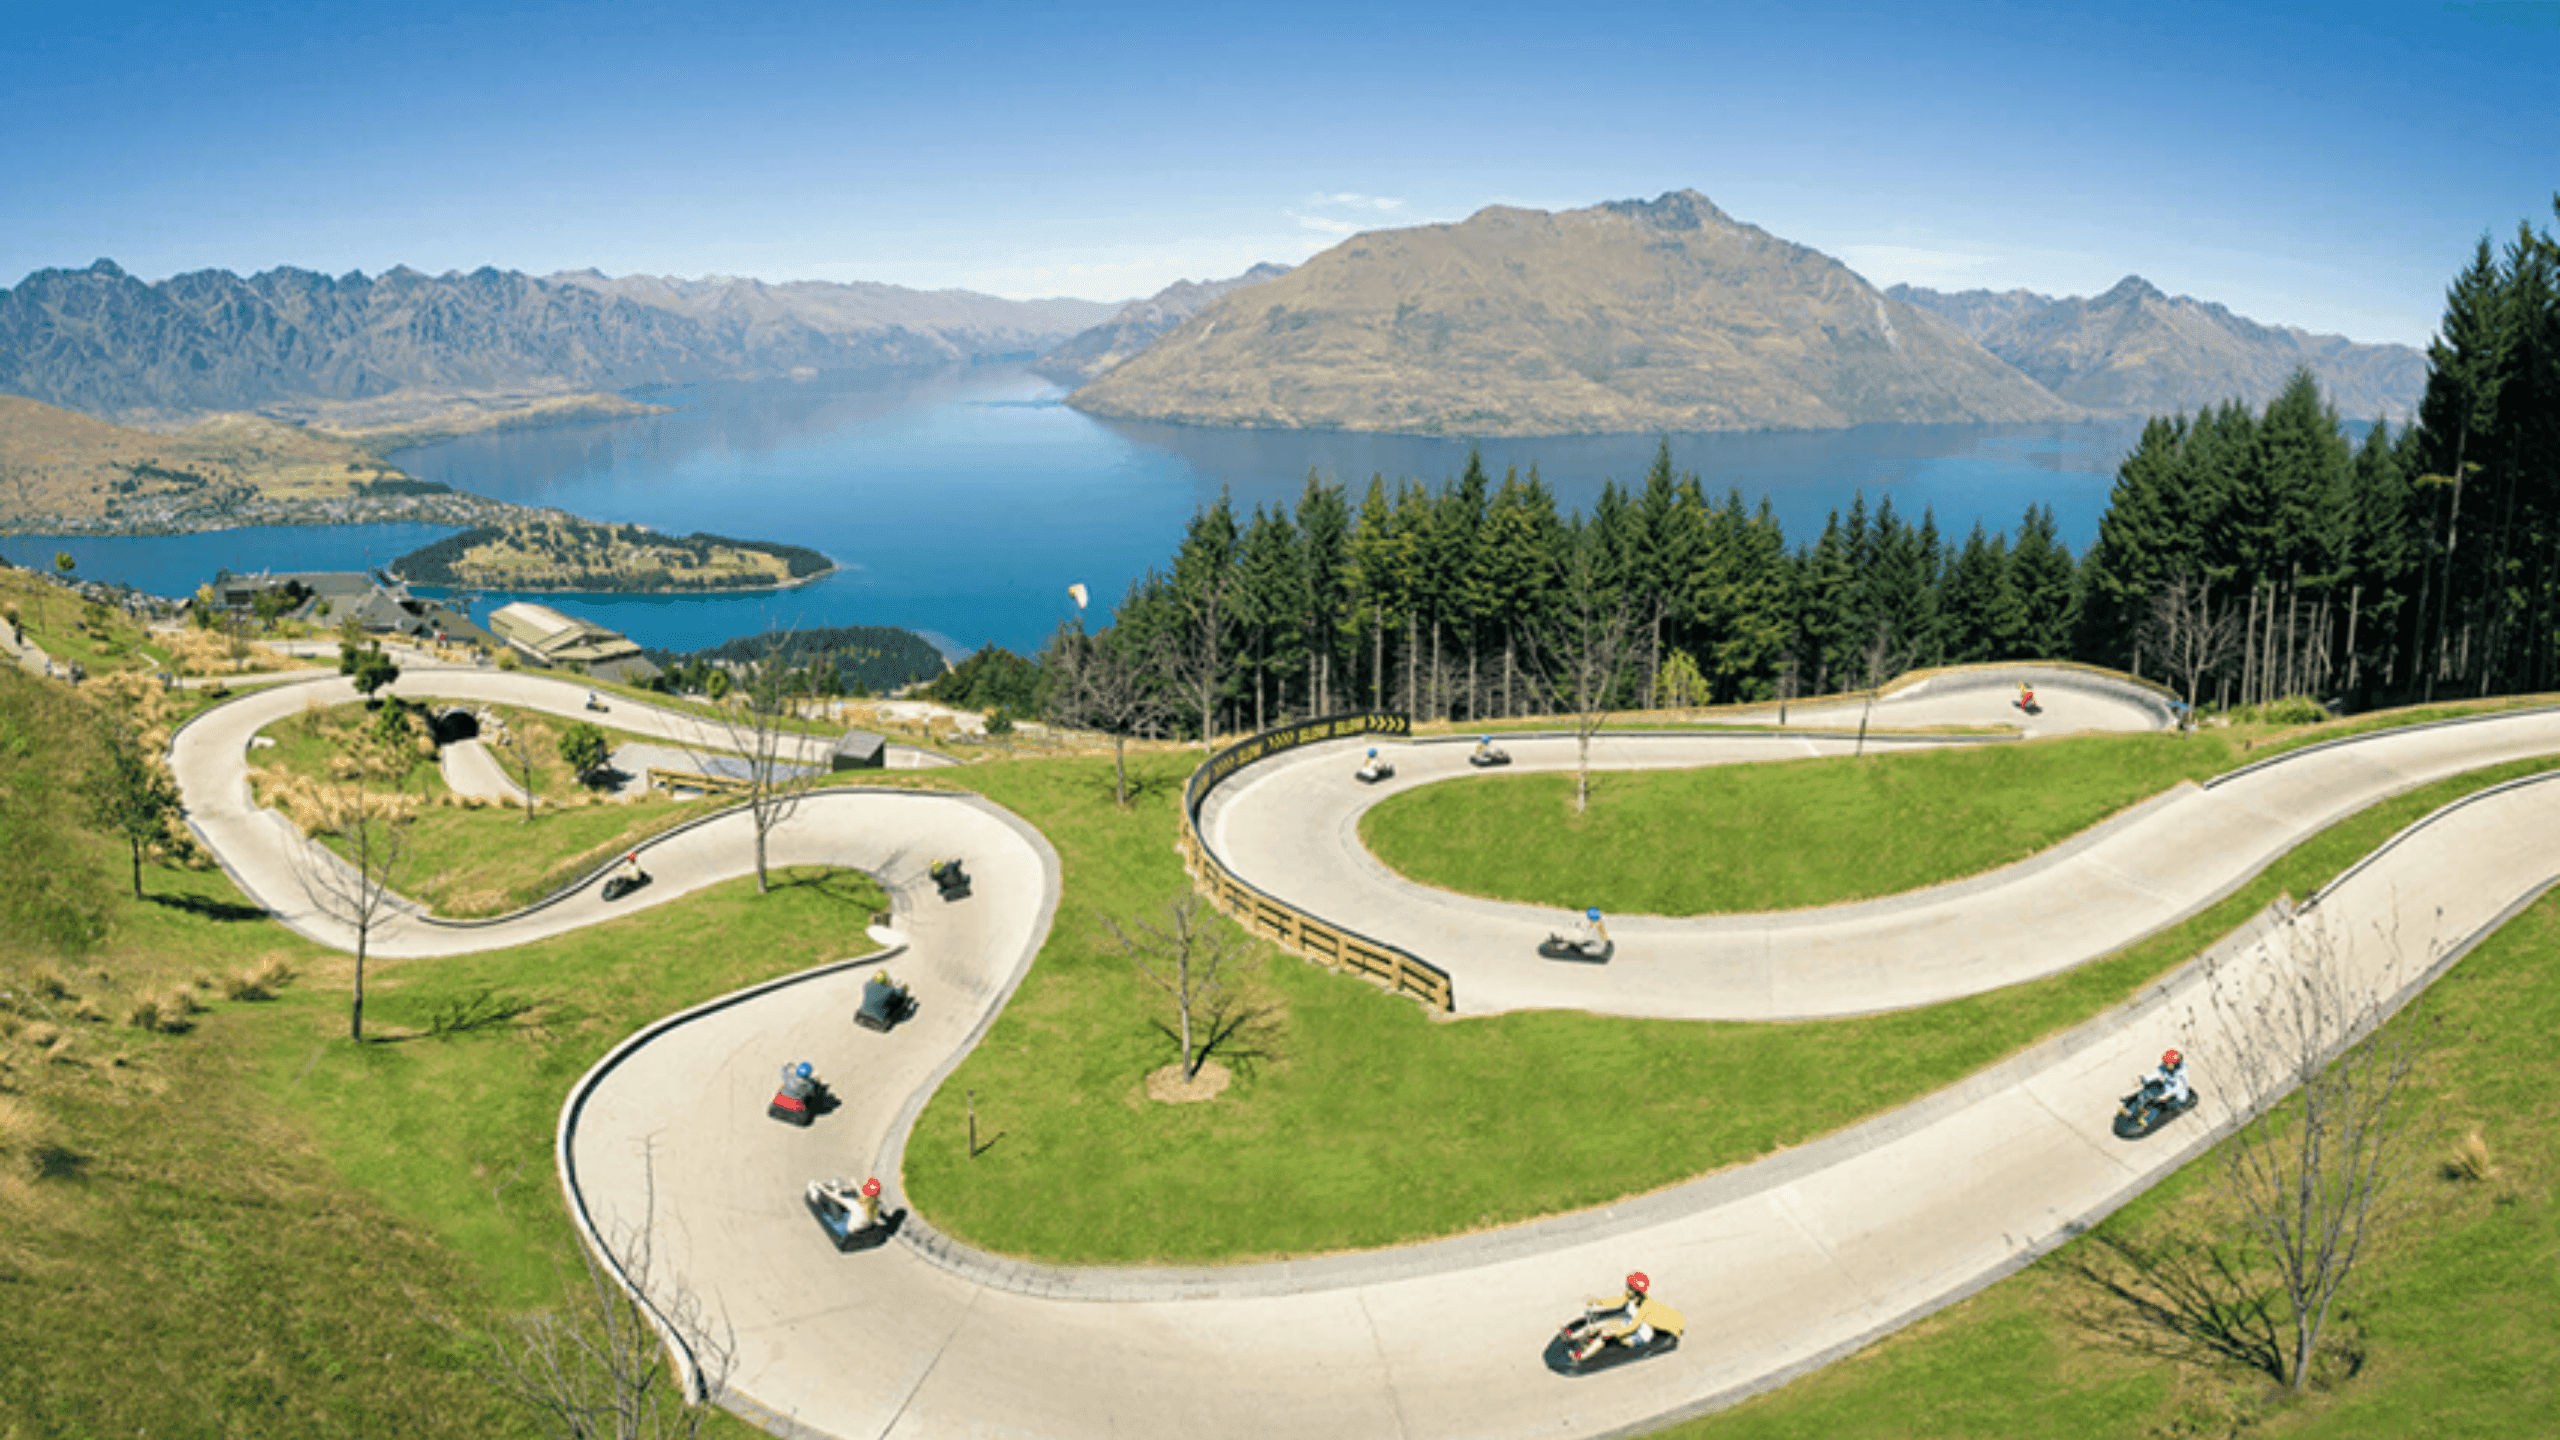 Aerial view of the Queenstown luge track